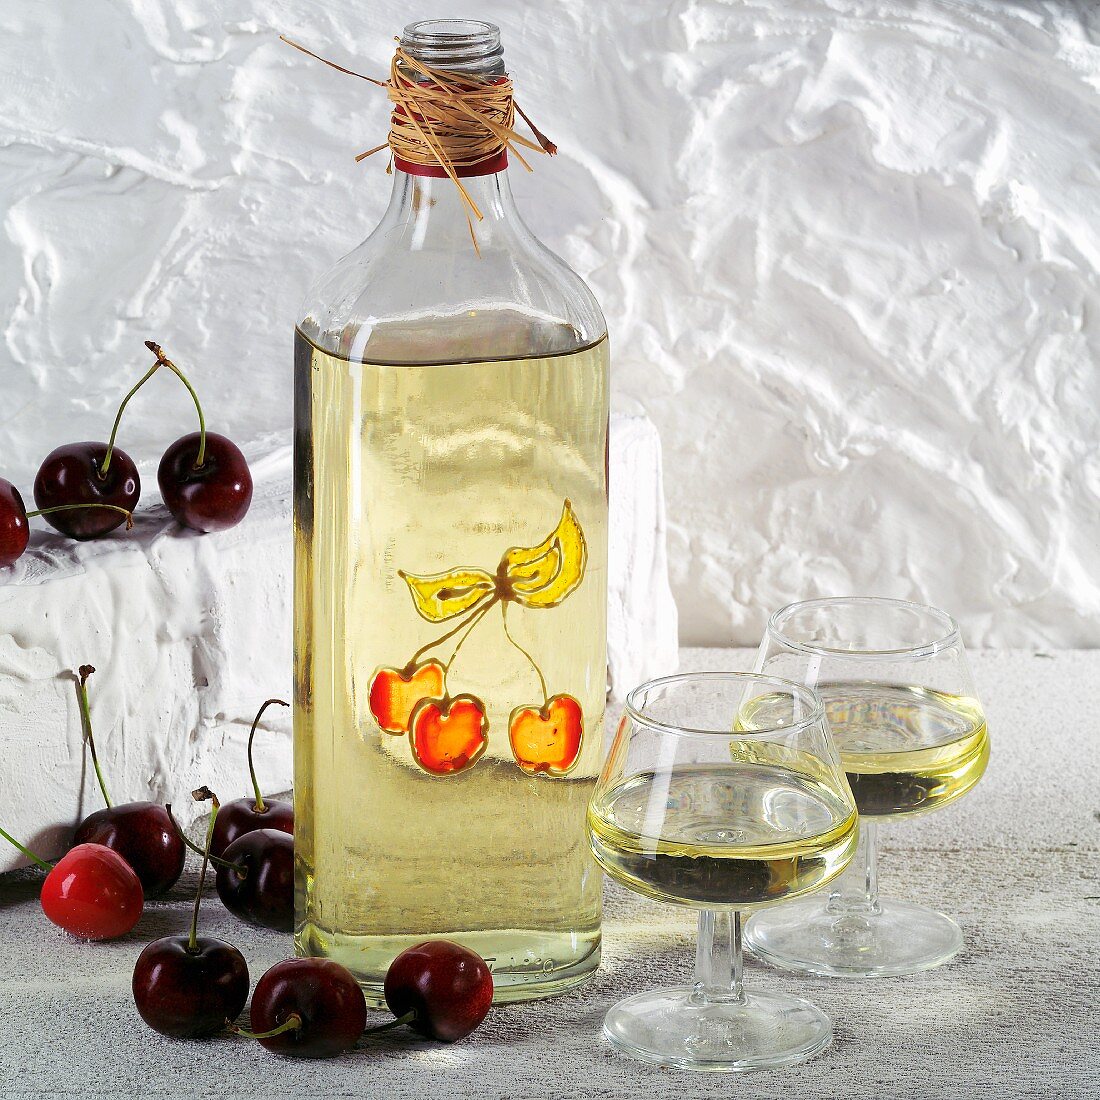 A bottle and two glasses of kirsch (cherry brandy)